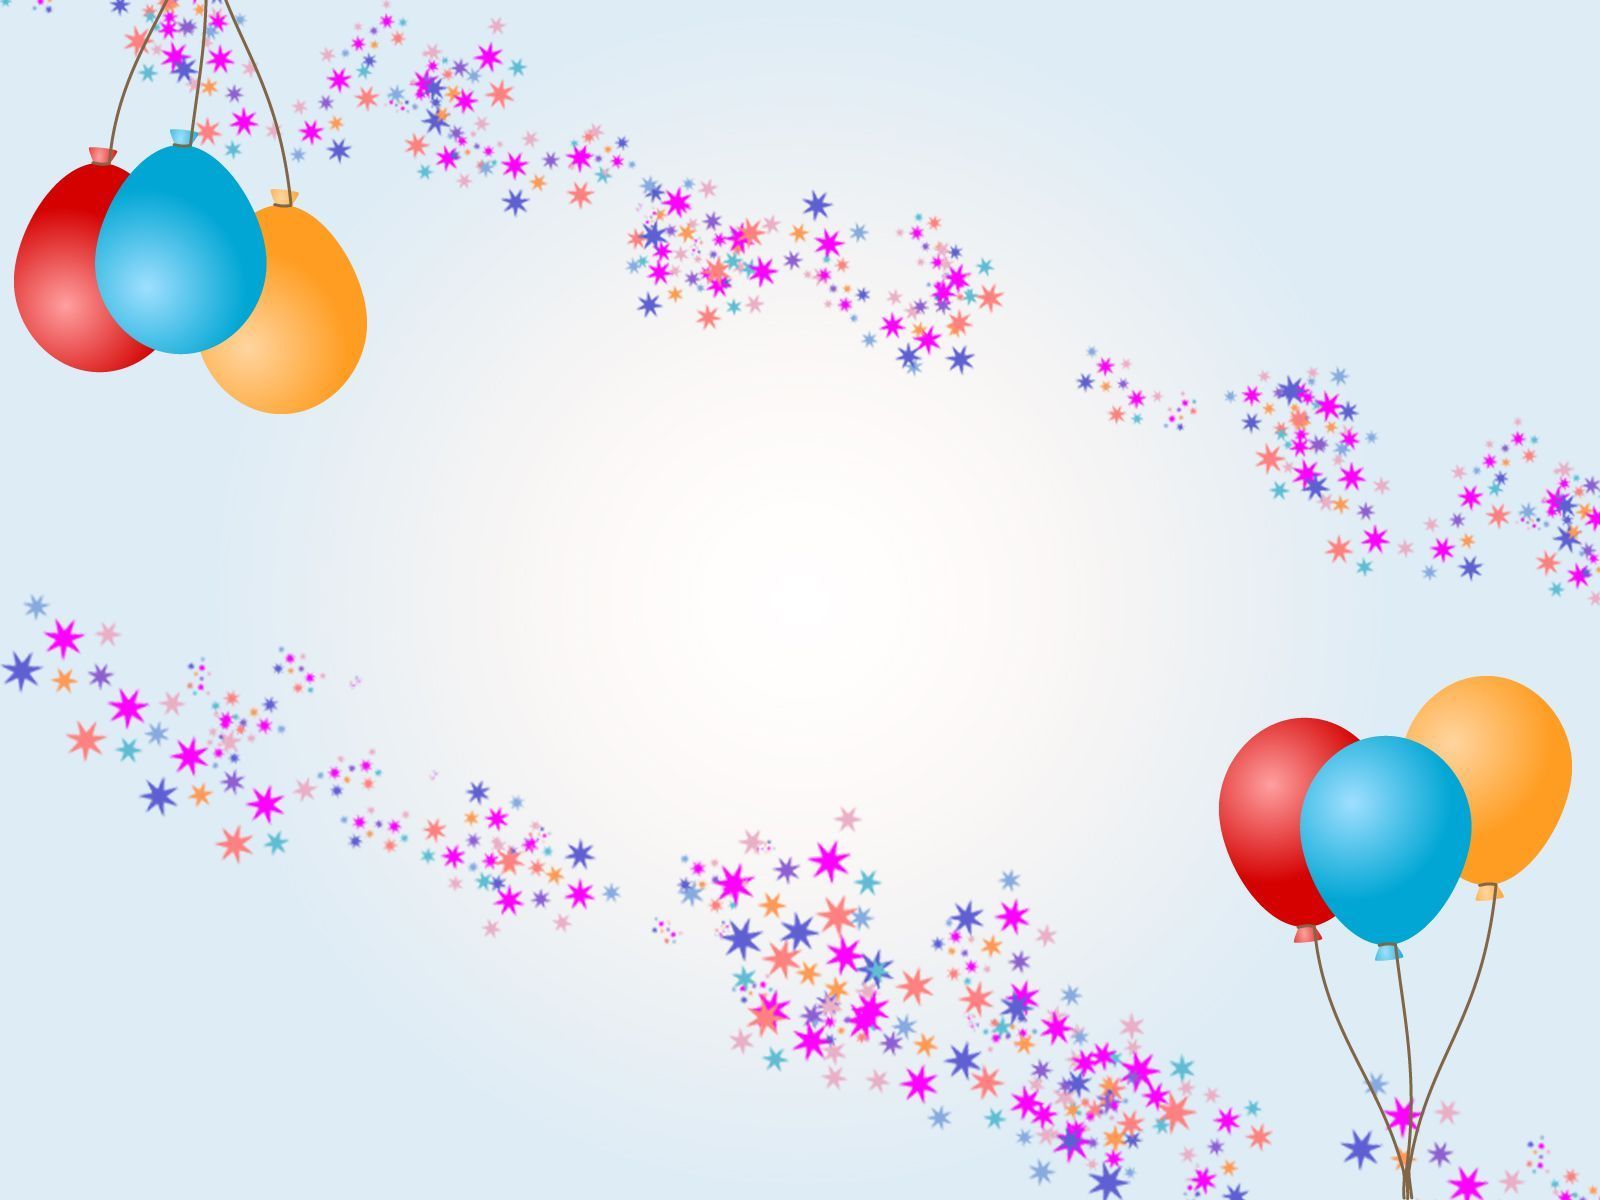 Balloons with Stars for Birthday Backgrounds - Cartoon, Holiday ...